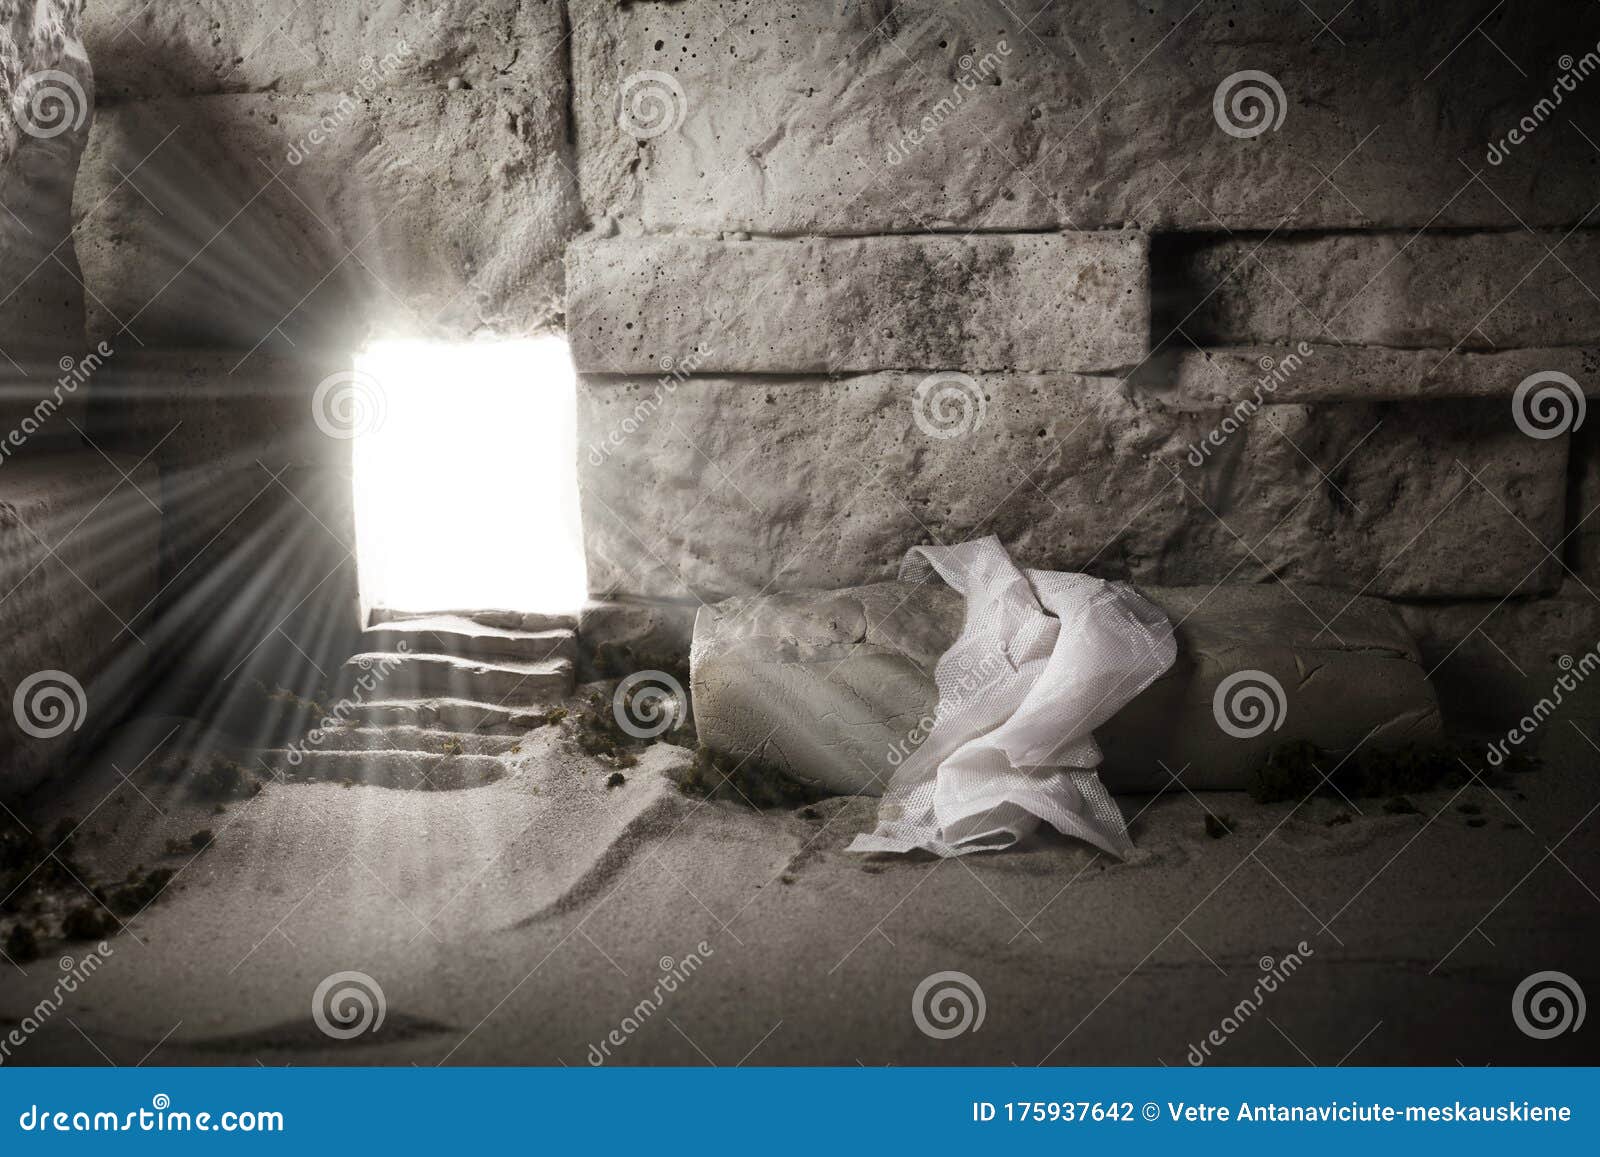 empty tomb while light shines from the outside. jesus christ resurrection. christian easter concept.